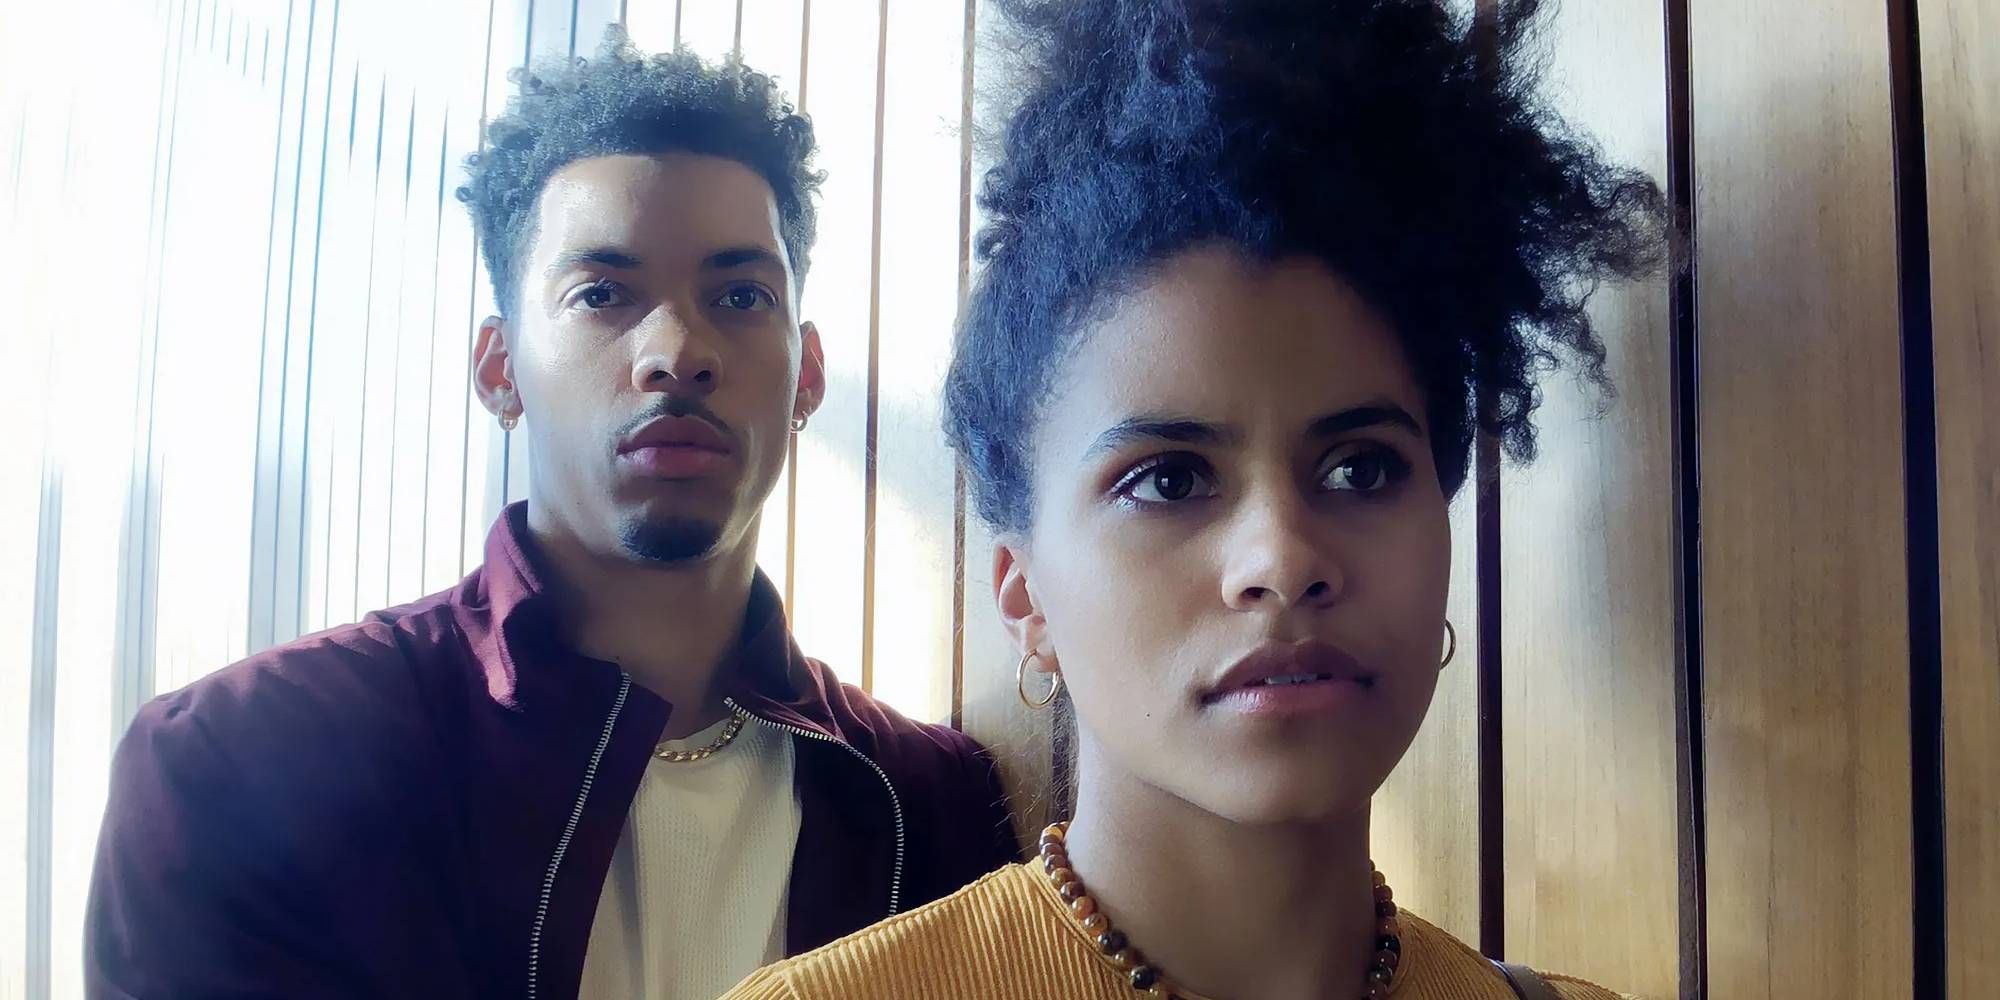 Zazie Beetz in High Flying Bird looking at something or someone off-camera.